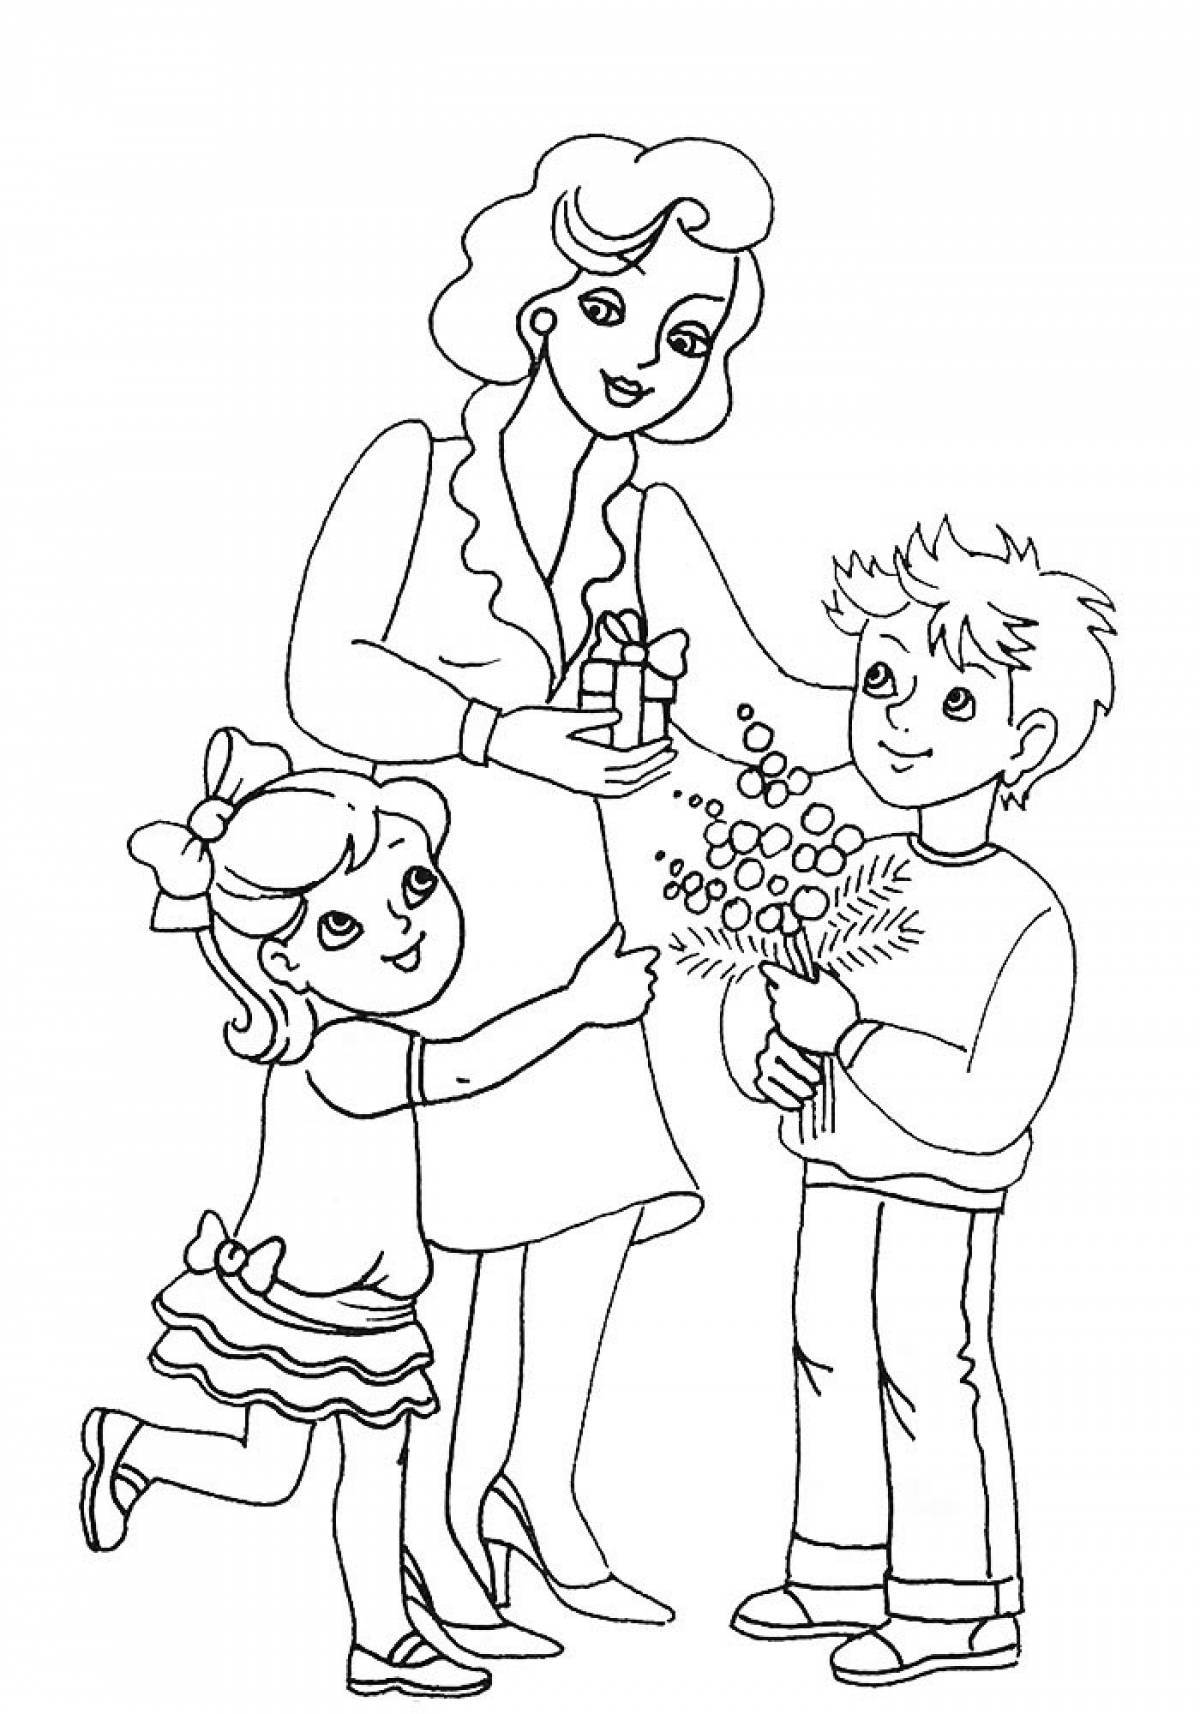 Children give a gift to mom